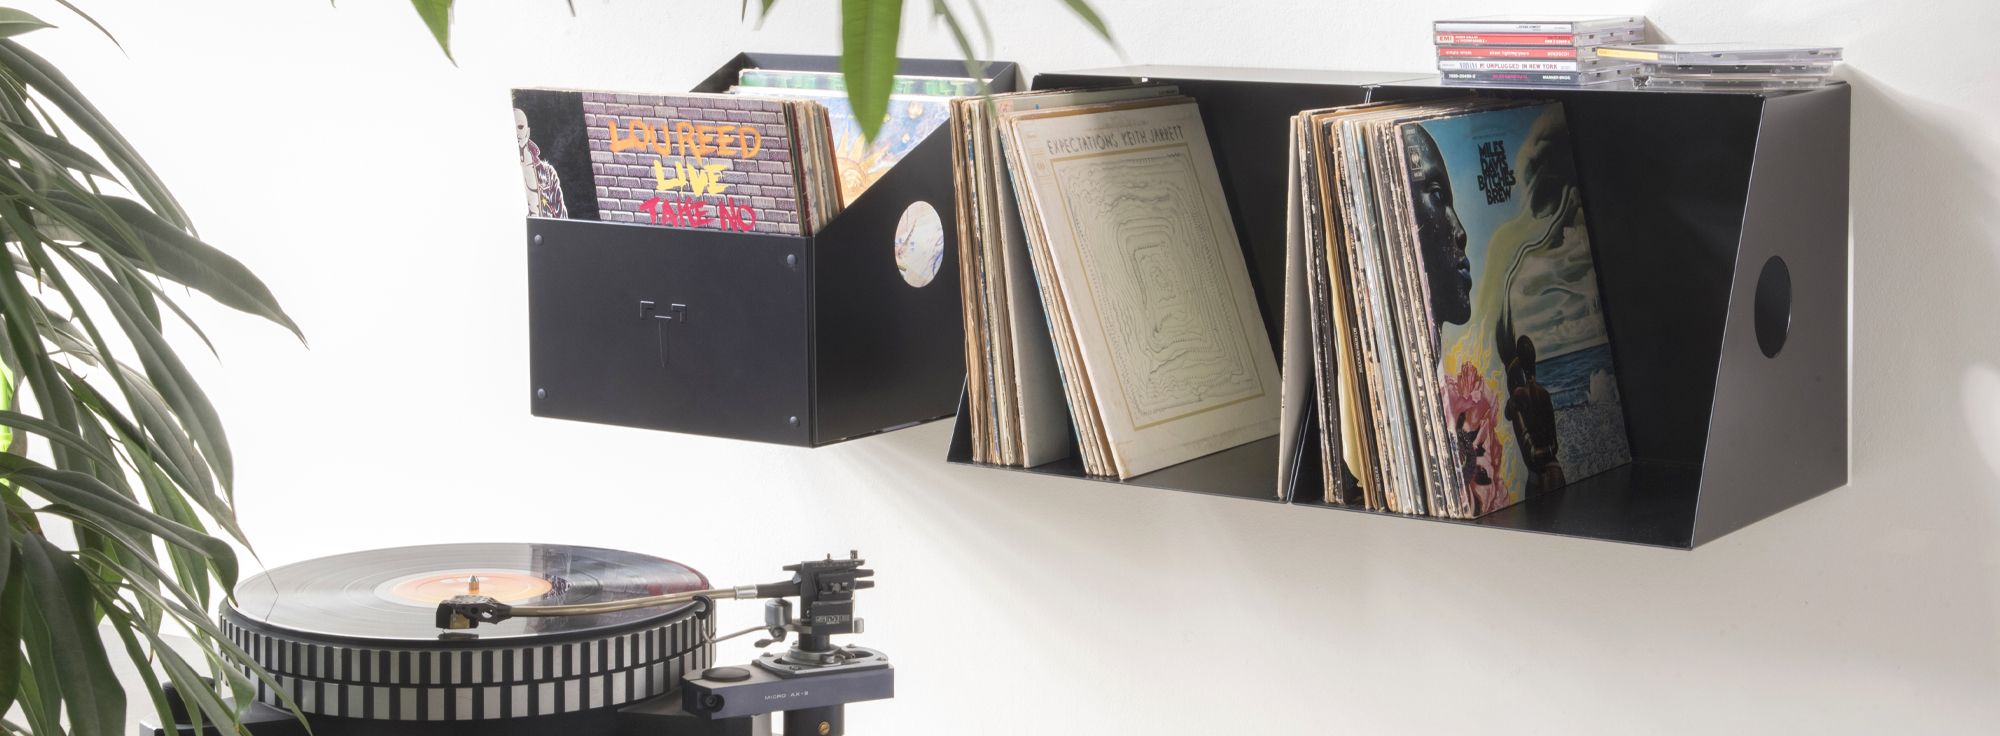 Discreet and practical storage to showcase your vinyl records